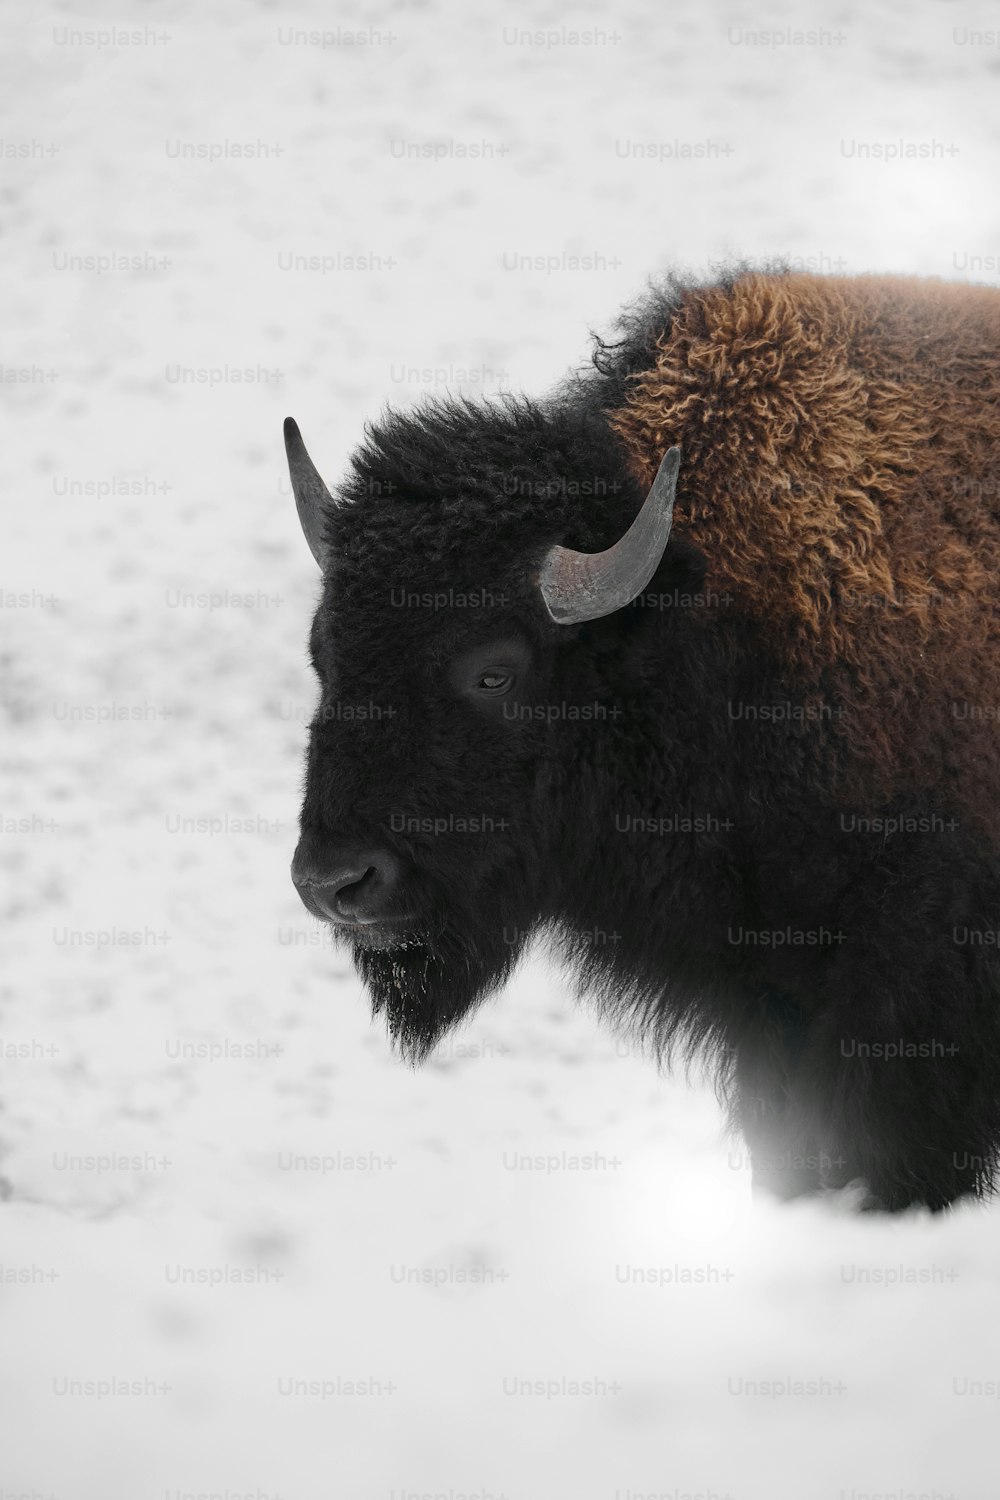 a bison with horns standing in the snow